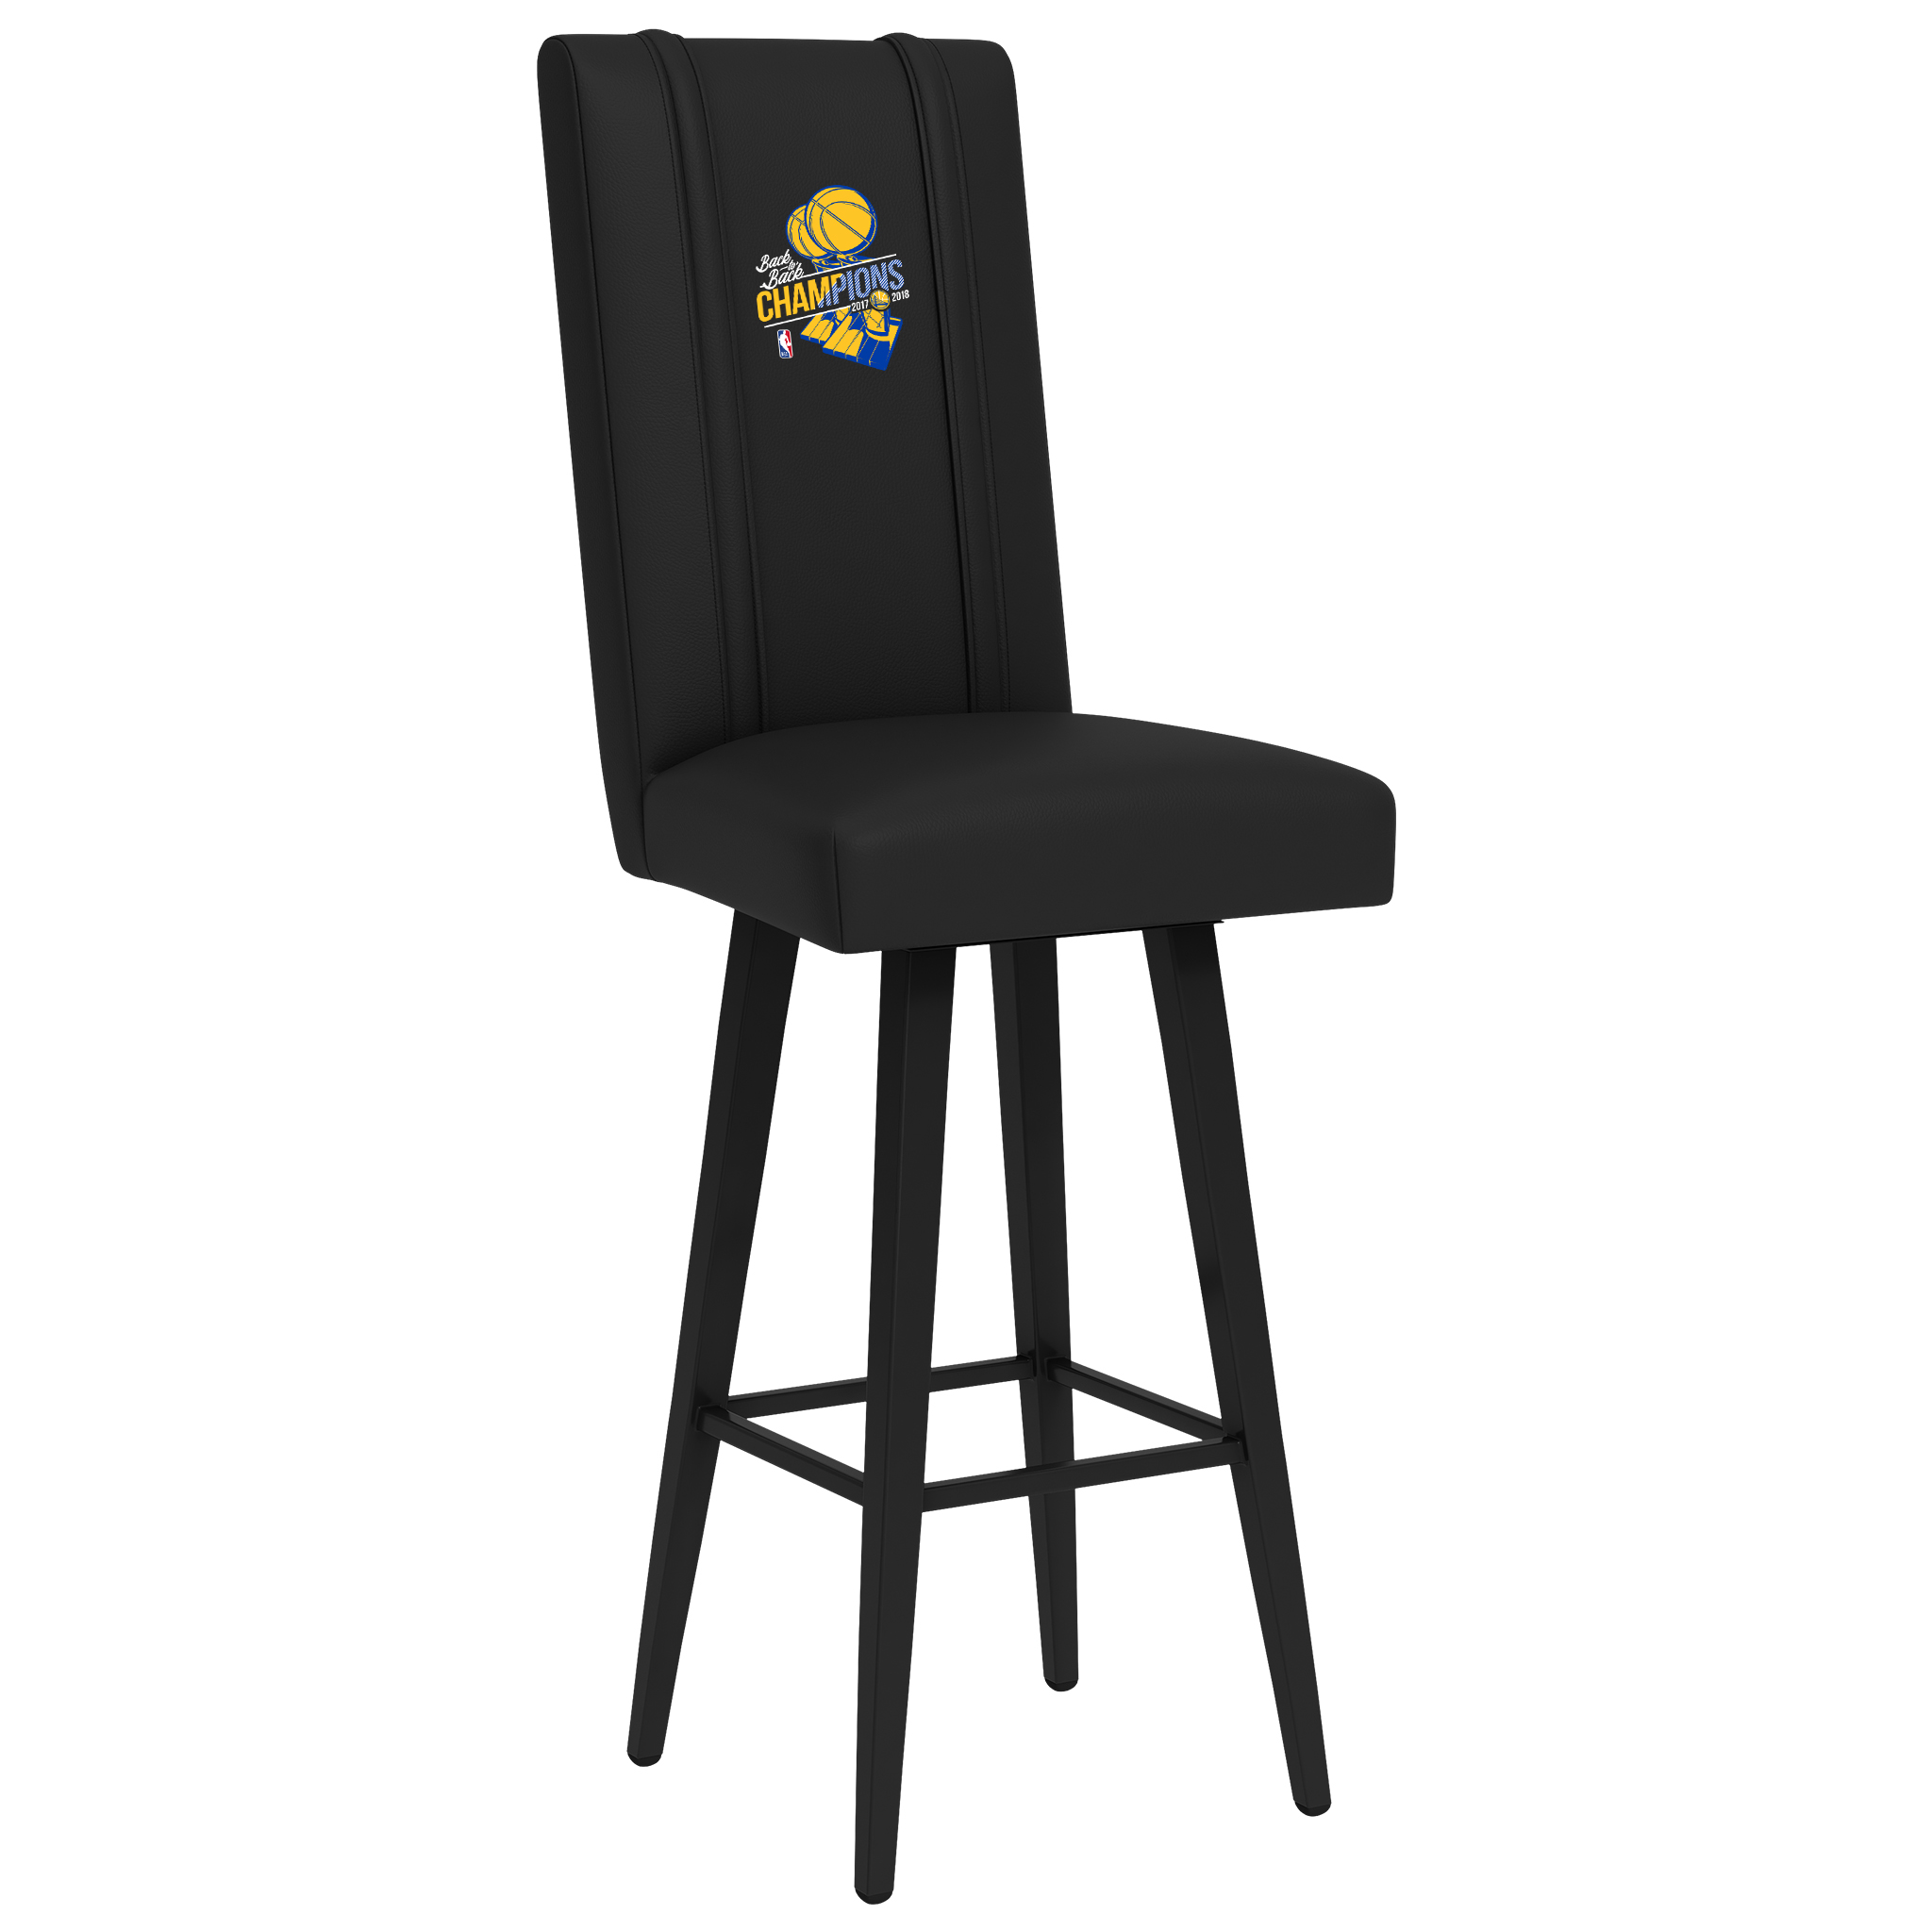 Golden State Warriors Swivel Bar Stool With Golden State Warriors 2018 Champions Logo Panel